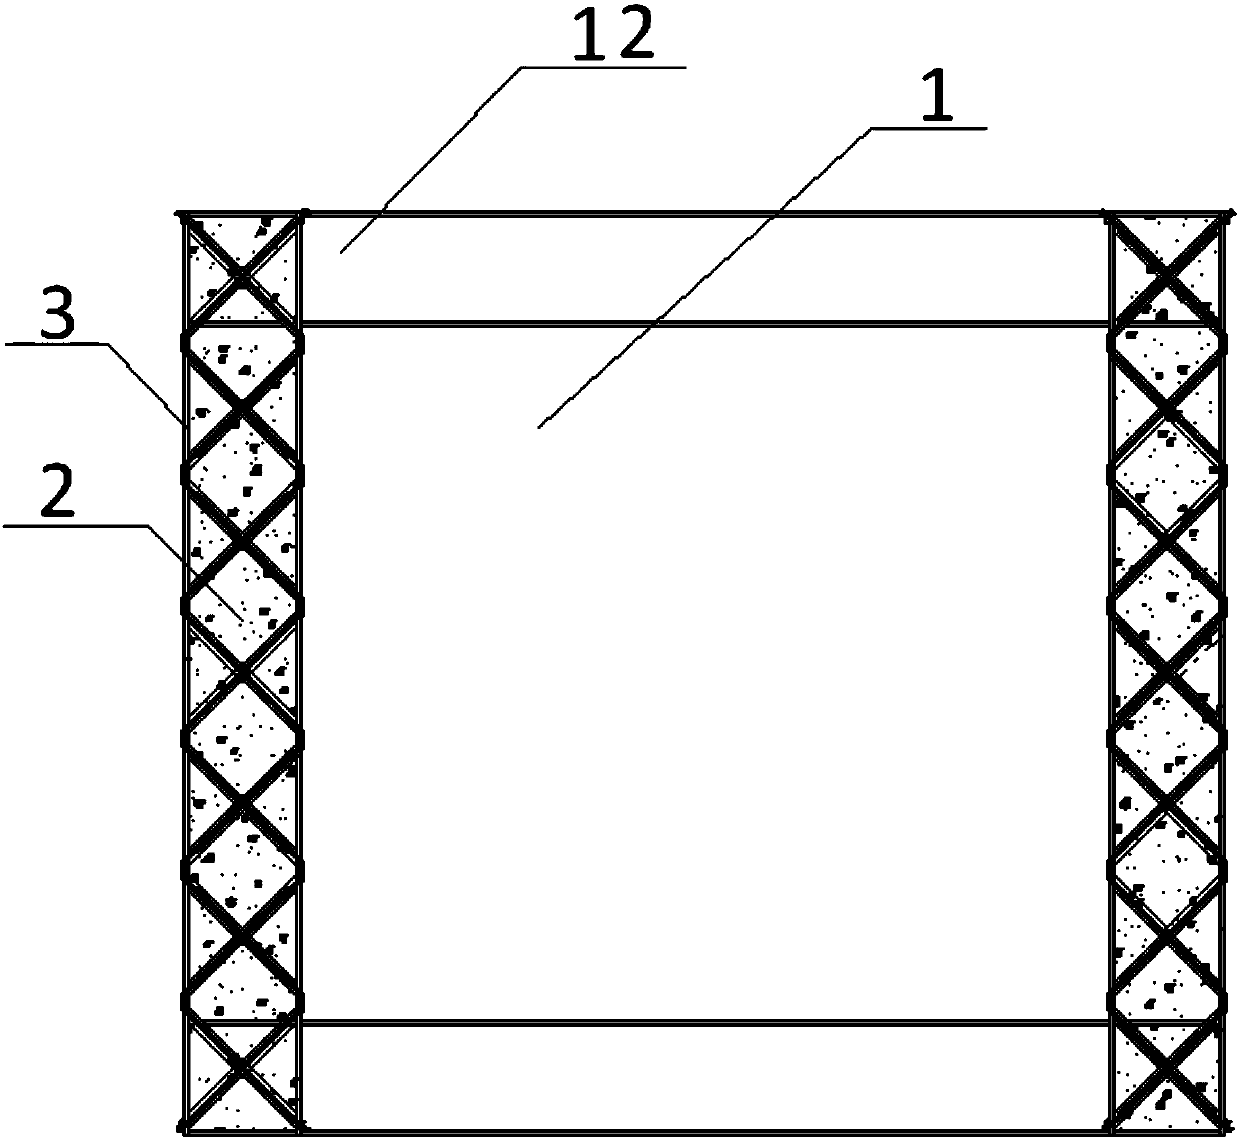 Column Flange Post-tensioned Steel and Concrete Partial Composite Frame-Steel Plate Shear Wall Structure